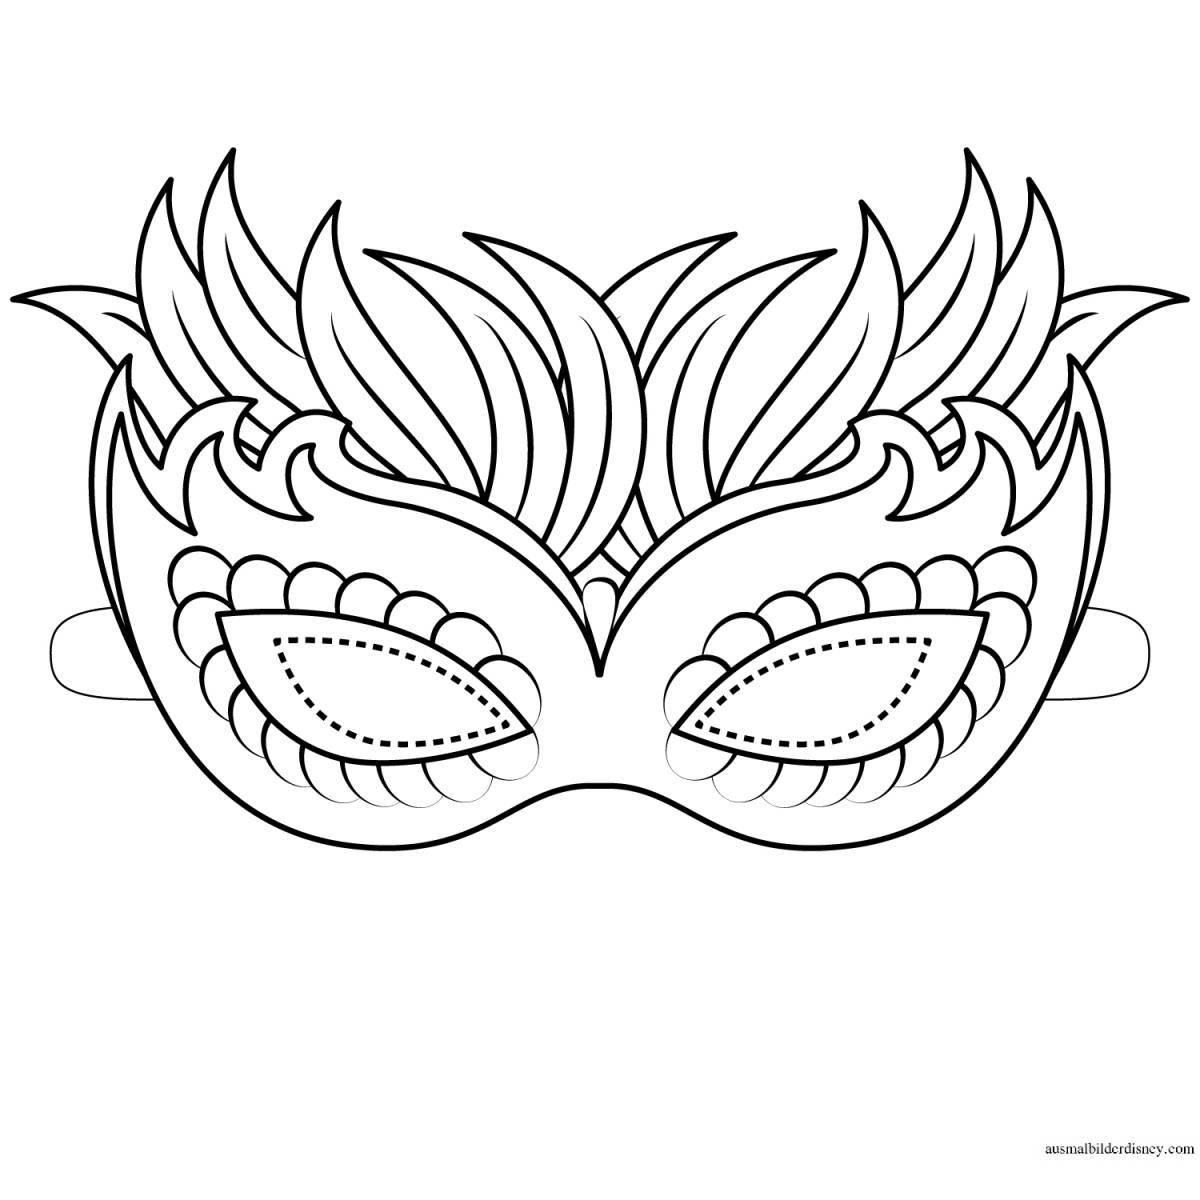 Glowing moisturizing face masks coloring page